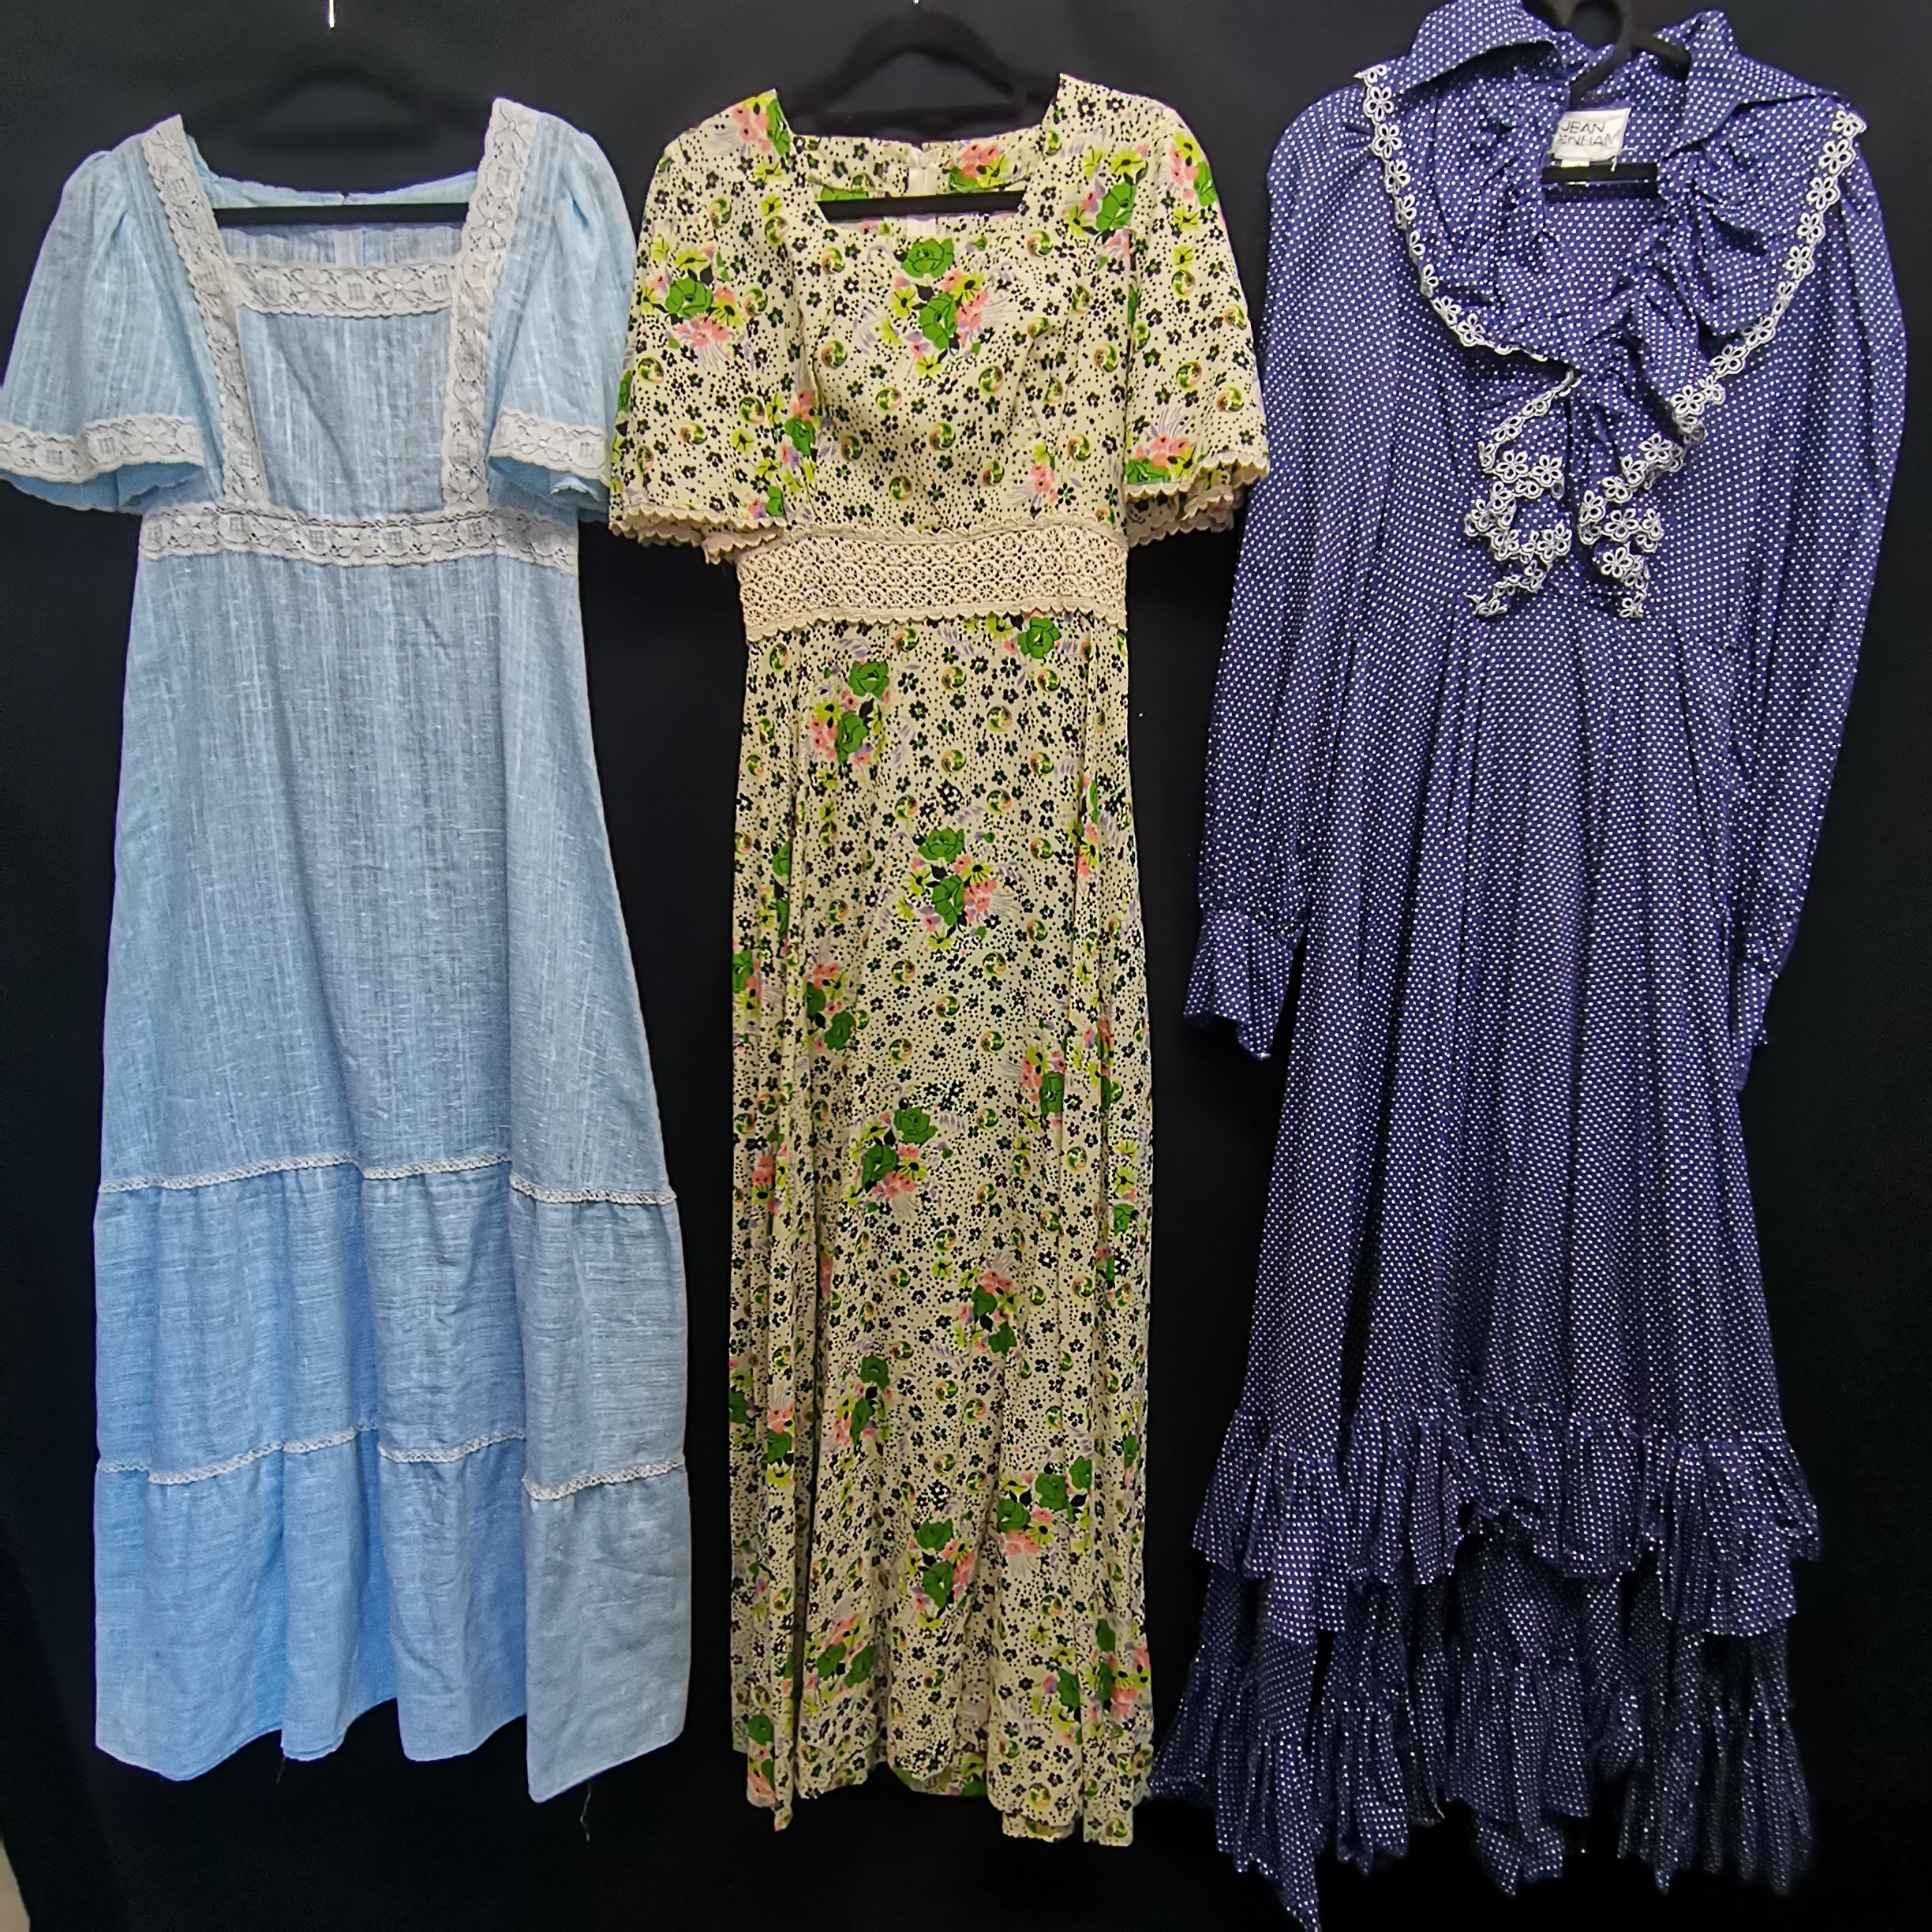 Three 1960s maxi dresses, pale blue poly cotton with cap sleeves 82 cm bust, green floral manmade